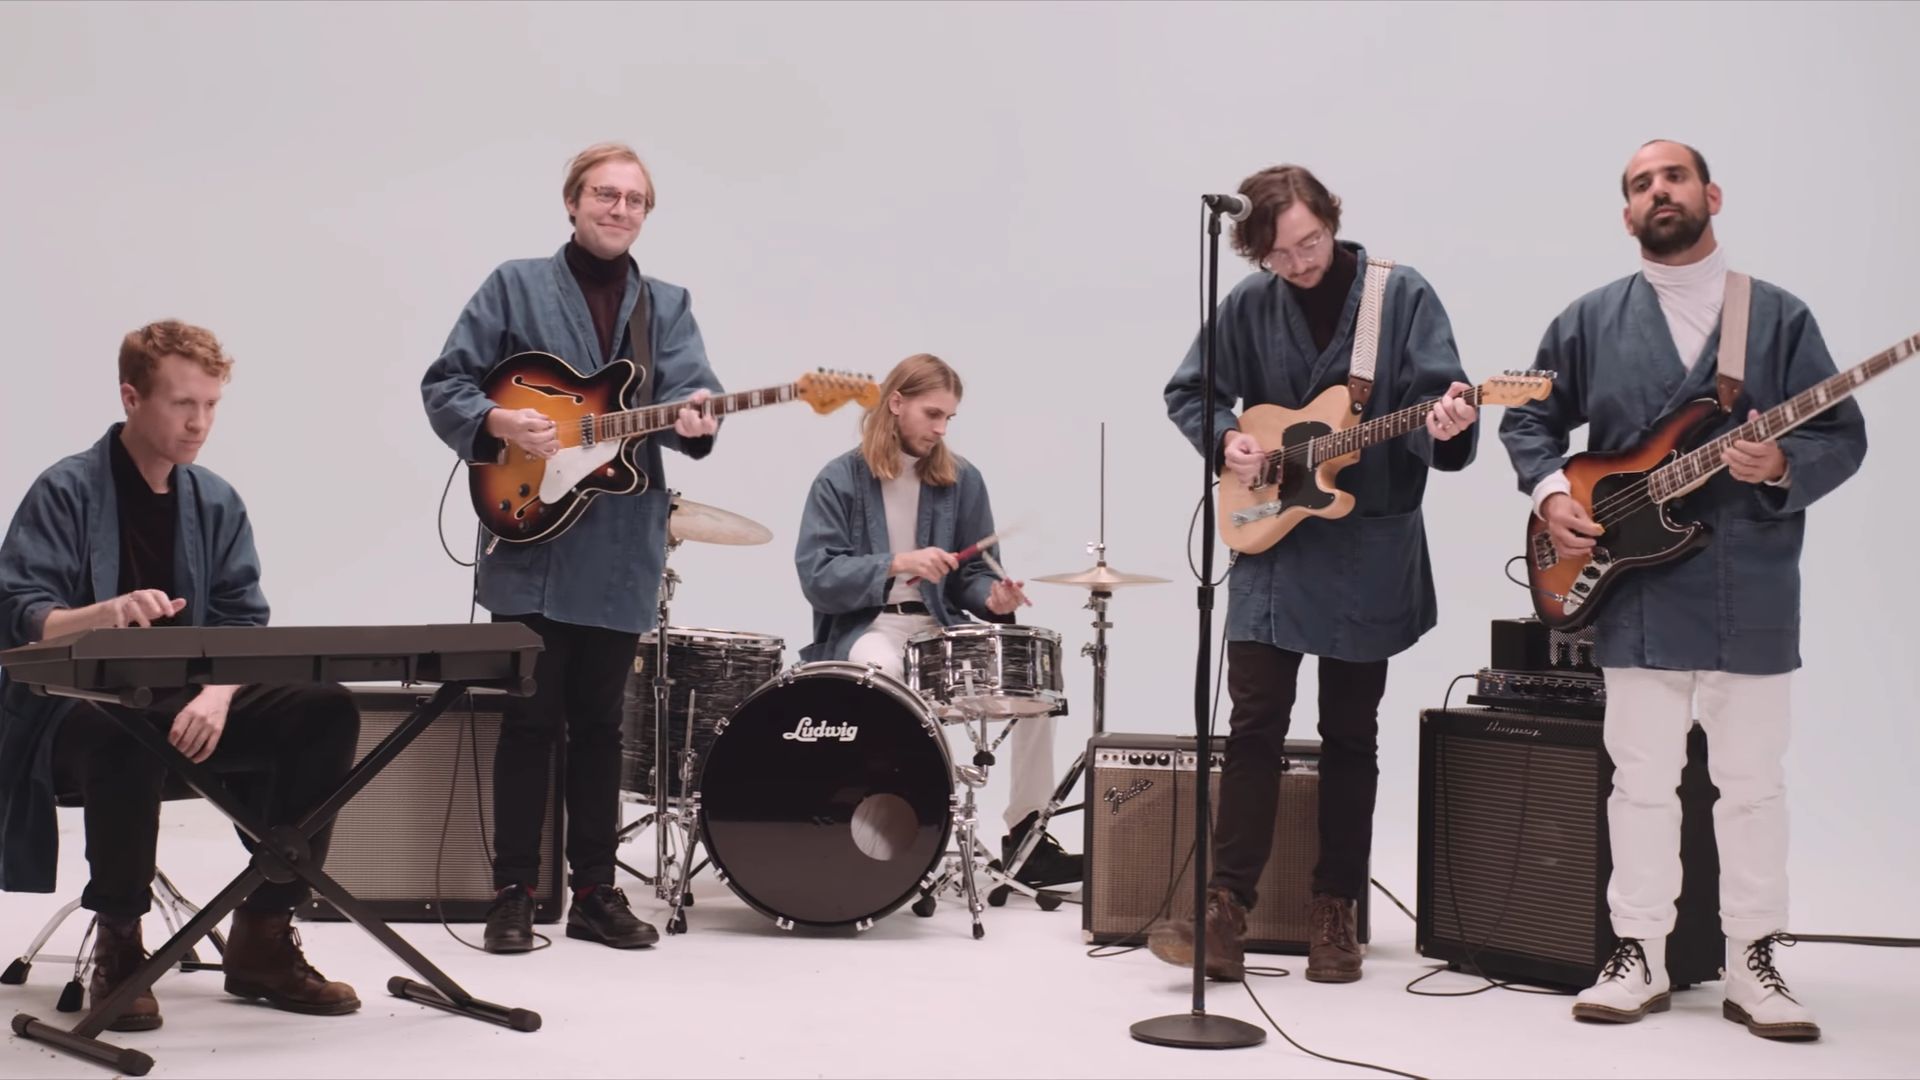 Real Estate bring in a very special guest for “Darling” video